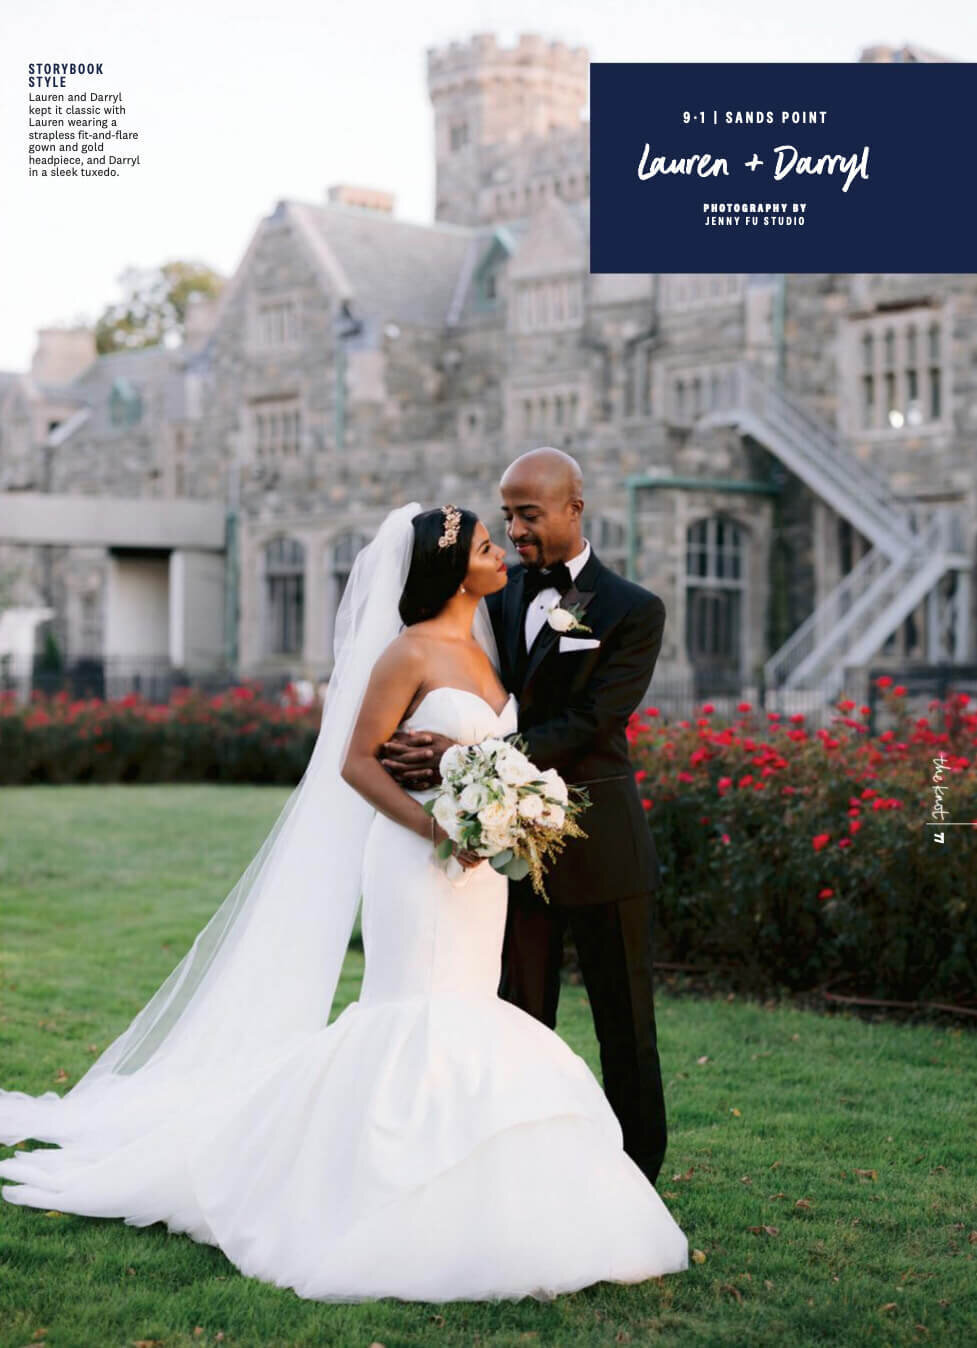 A page in The Knot Magazine where the bride and groom is in front of a castle. Image by Jenny Fu Studio